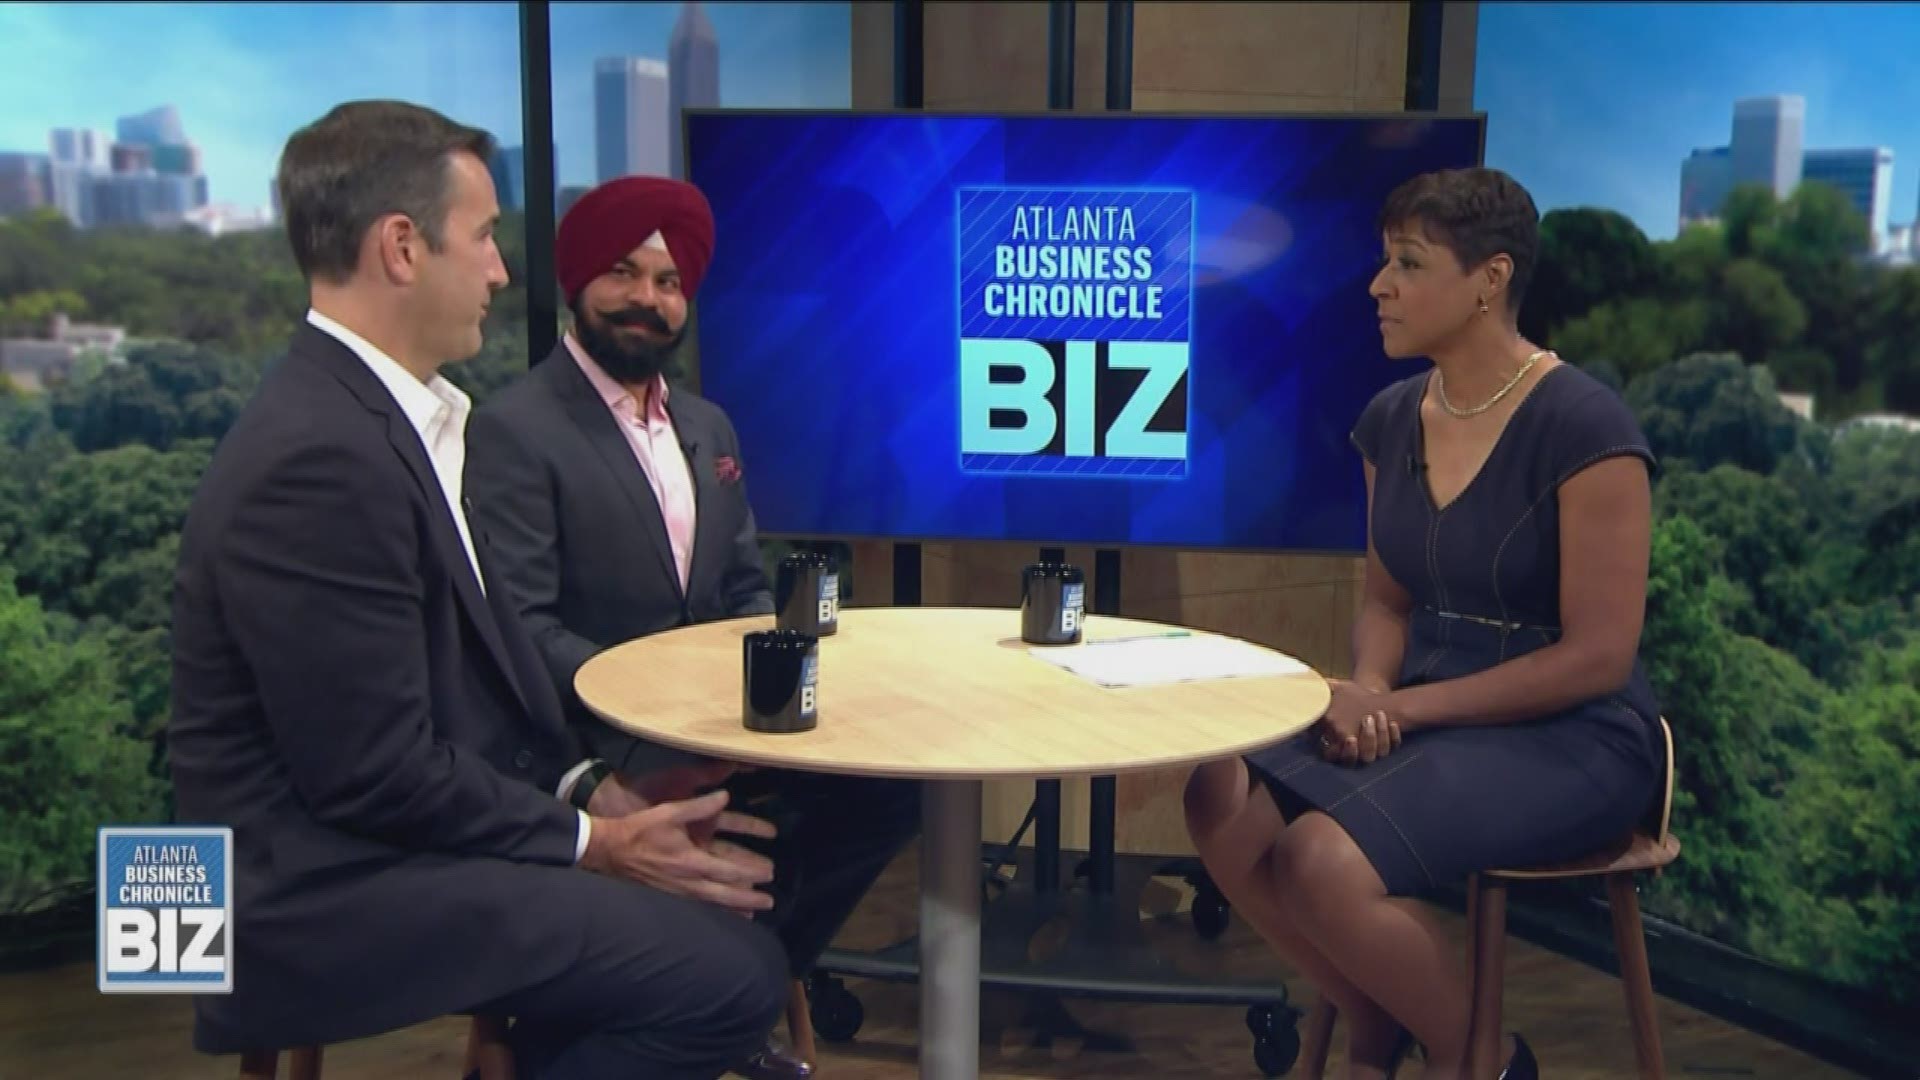 Roop Singh, founder of Intuit Factory, and Stephen Pair, CEO of BitPay, join Crystal Edmonson to talk about cytptocurrency and blockchain technology on BIZ.